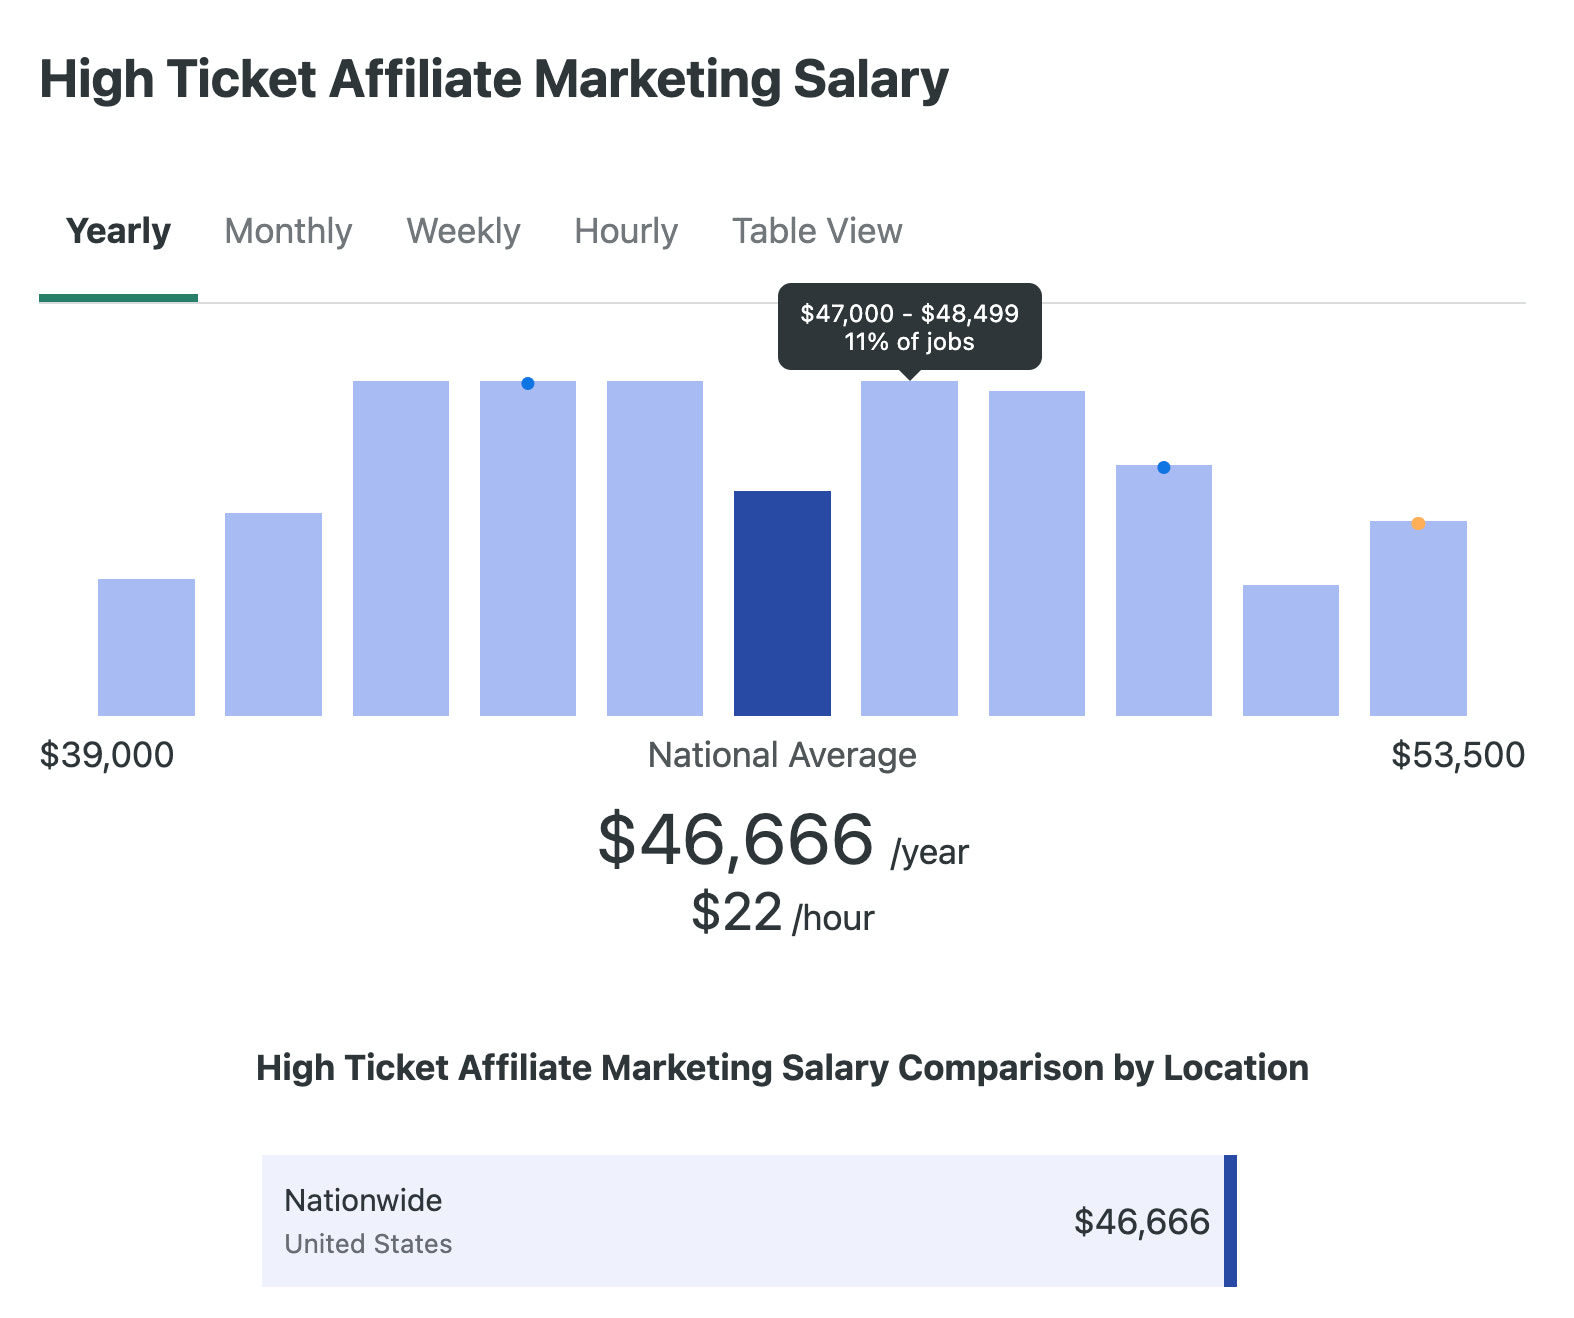 10 Best Gaming Affiliate Programs To Make Money In 2023